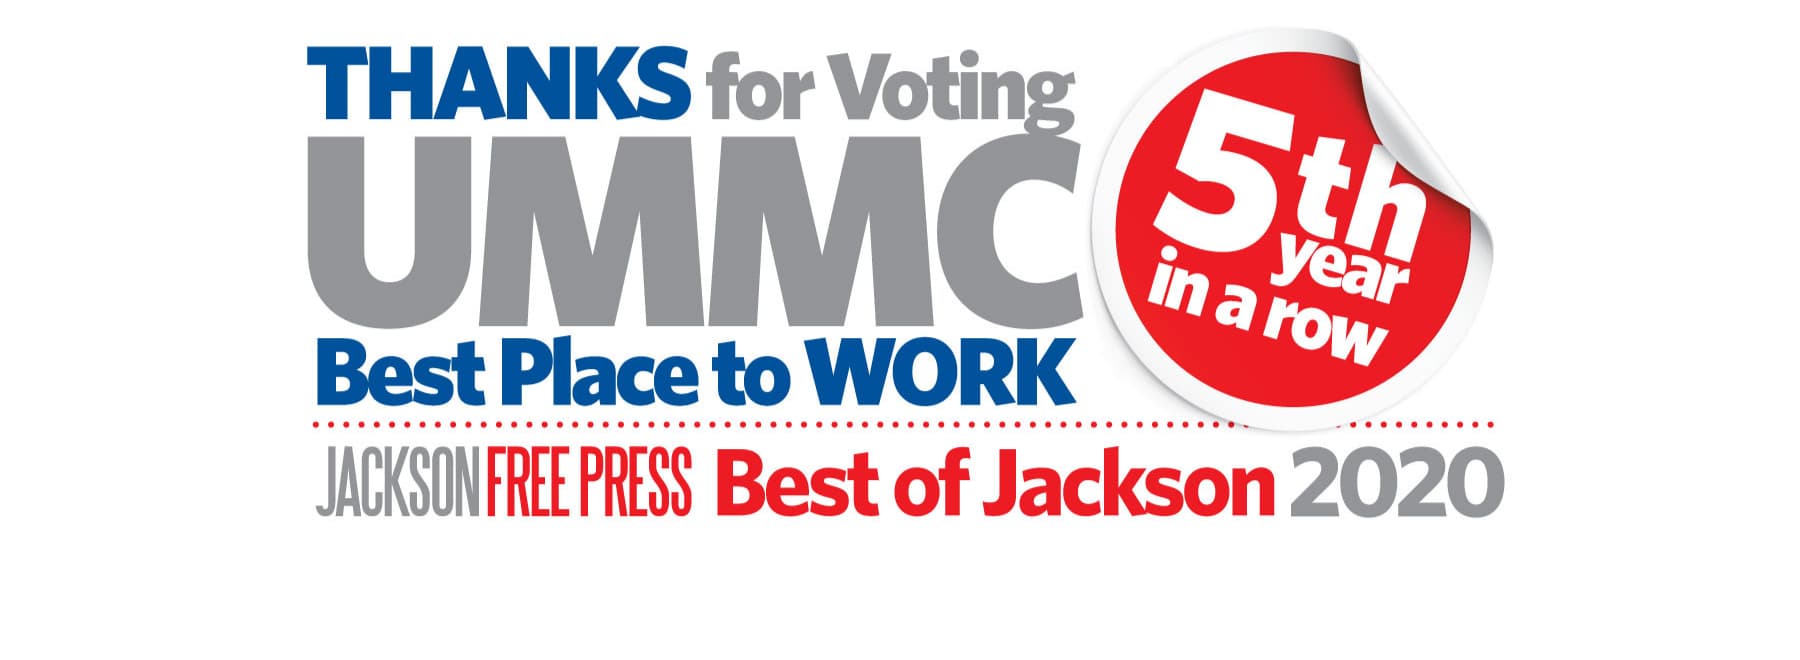 Thanks for voting UMMC best place to work 5th year in a row. Jackson Free Press. Best of Jackson 2020.